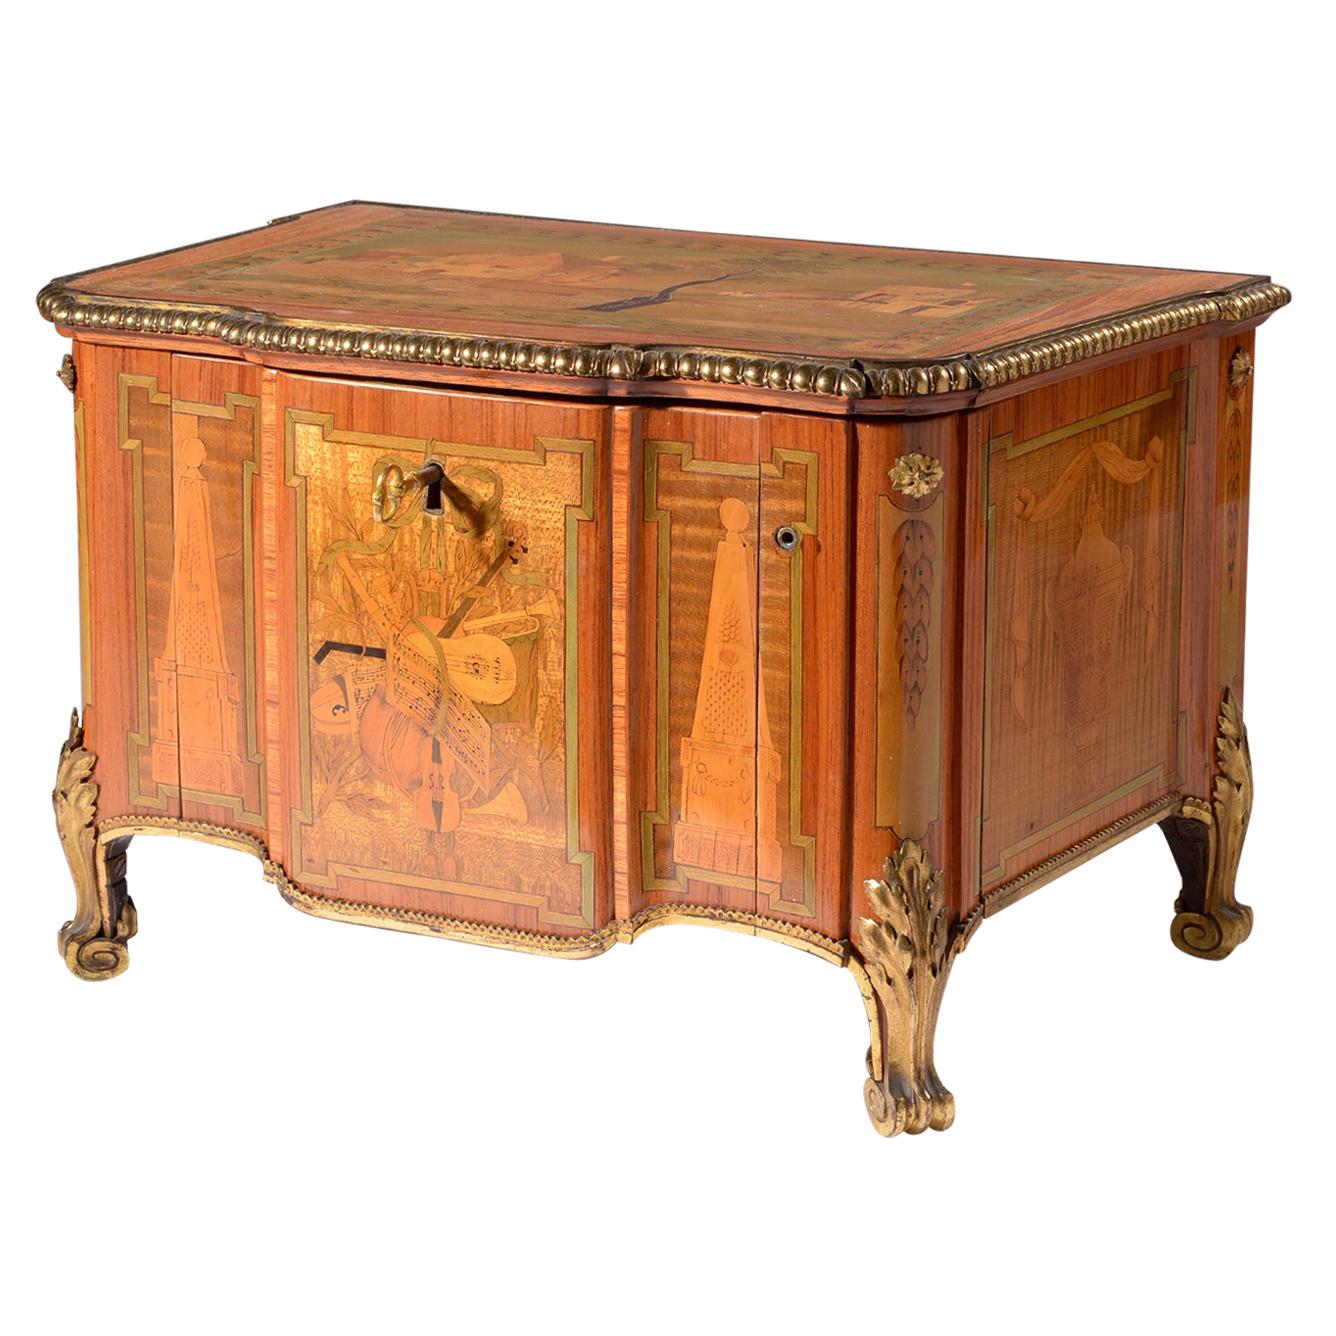 Louis XVI Serinette in the Form of a Miniature Commode by Richard, Paris, 1775